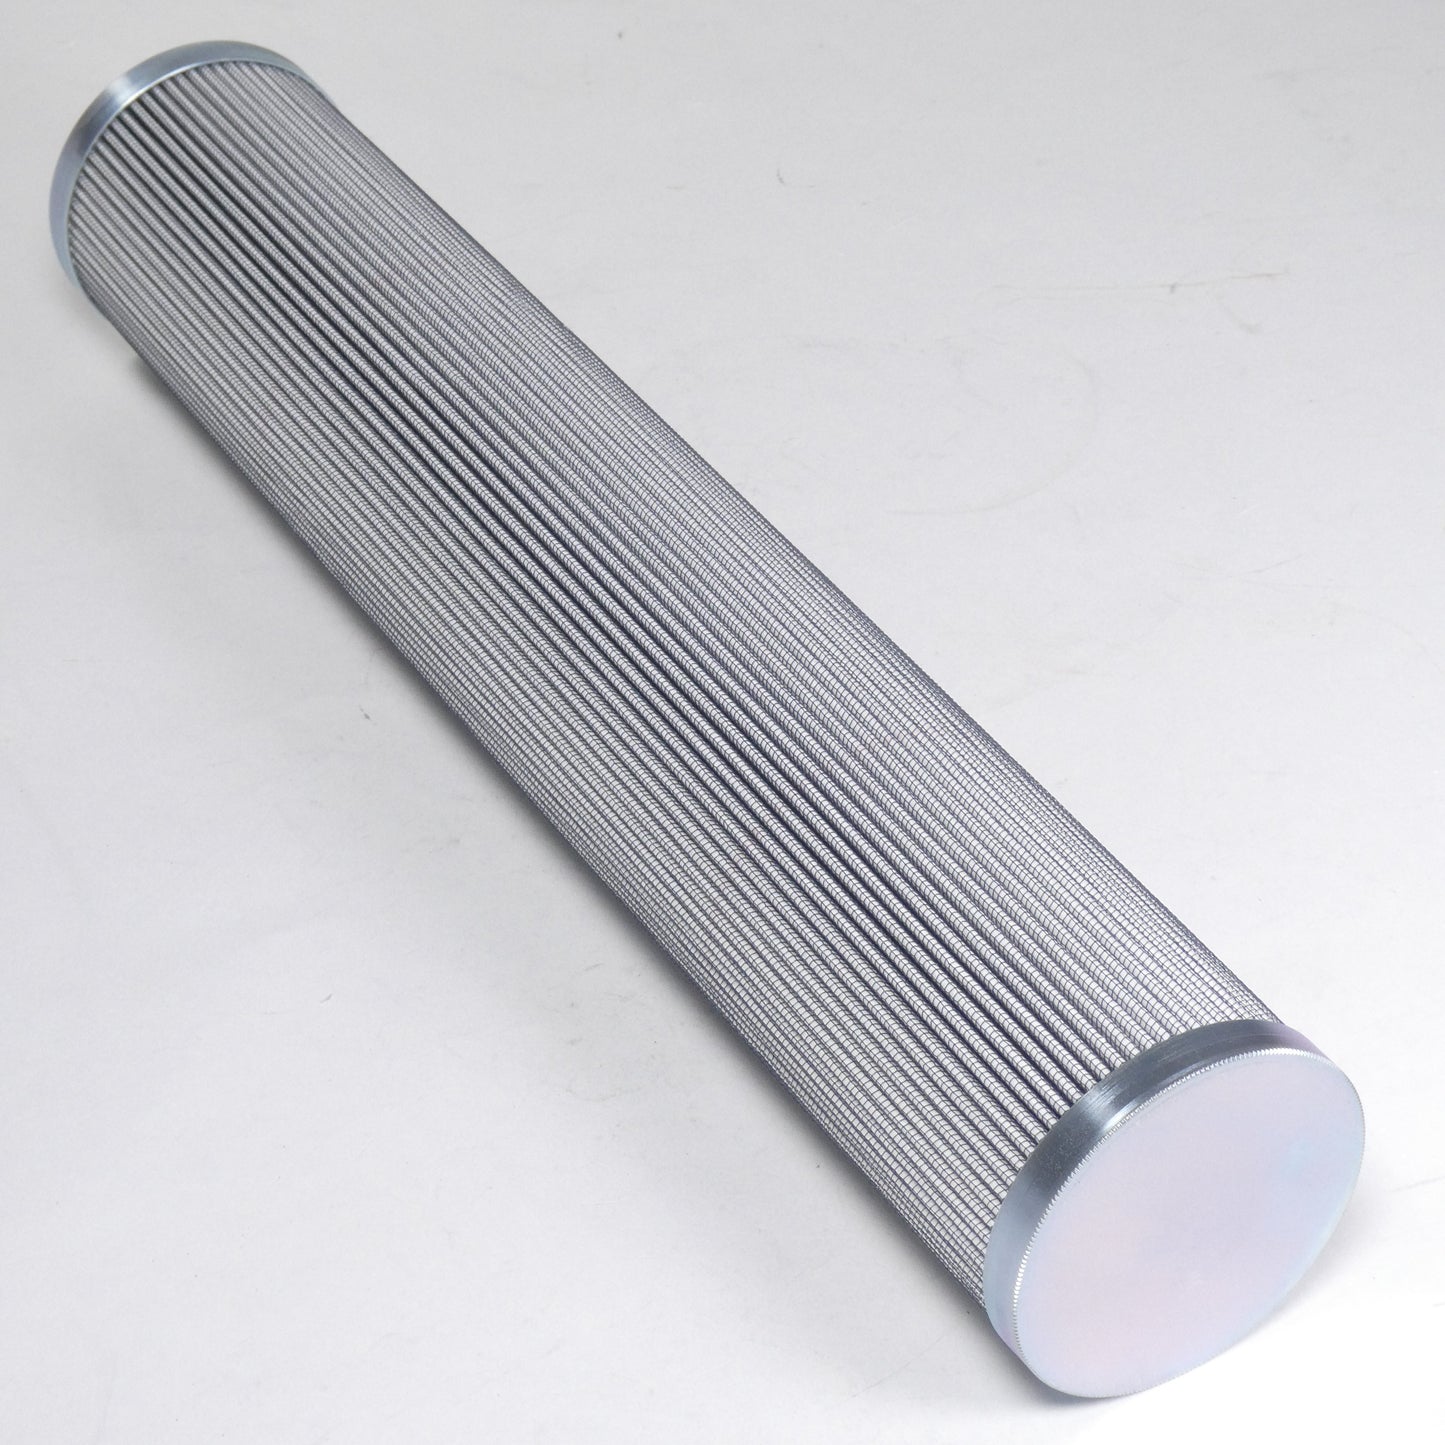 Hydrafil Replacement Filter Element for Kaydon KMP9601A12V16